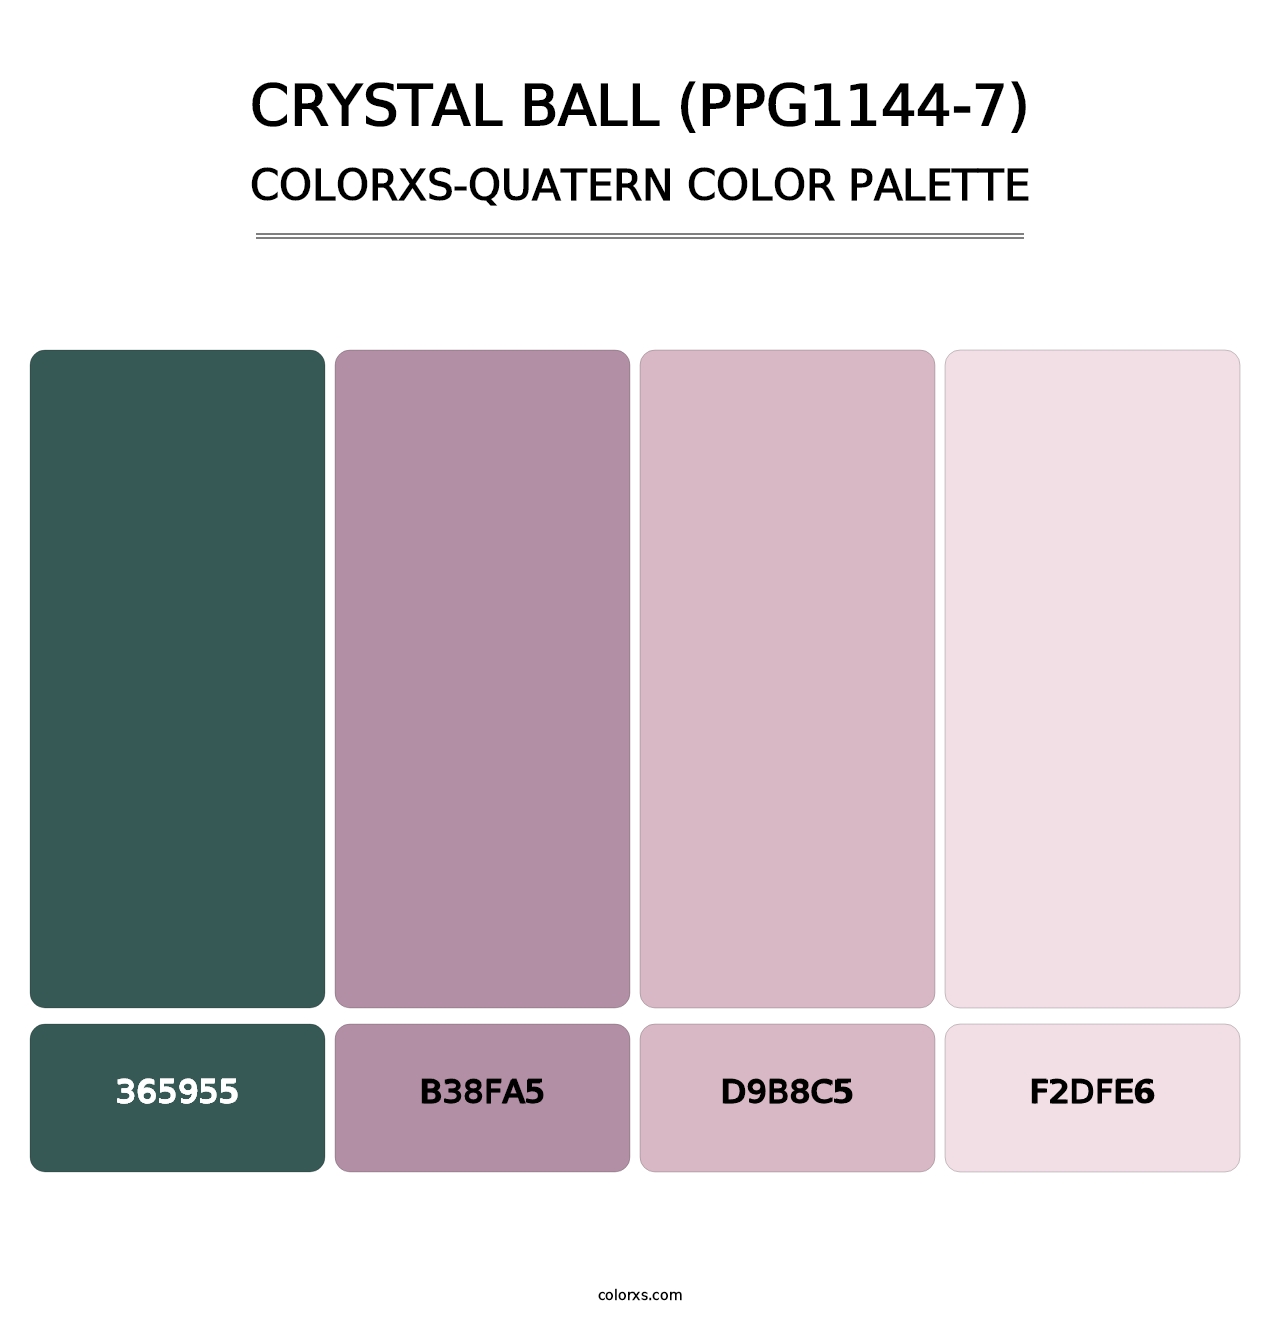 Crystal Ball (PPG1144-7) - Colorxs Quatern Palette